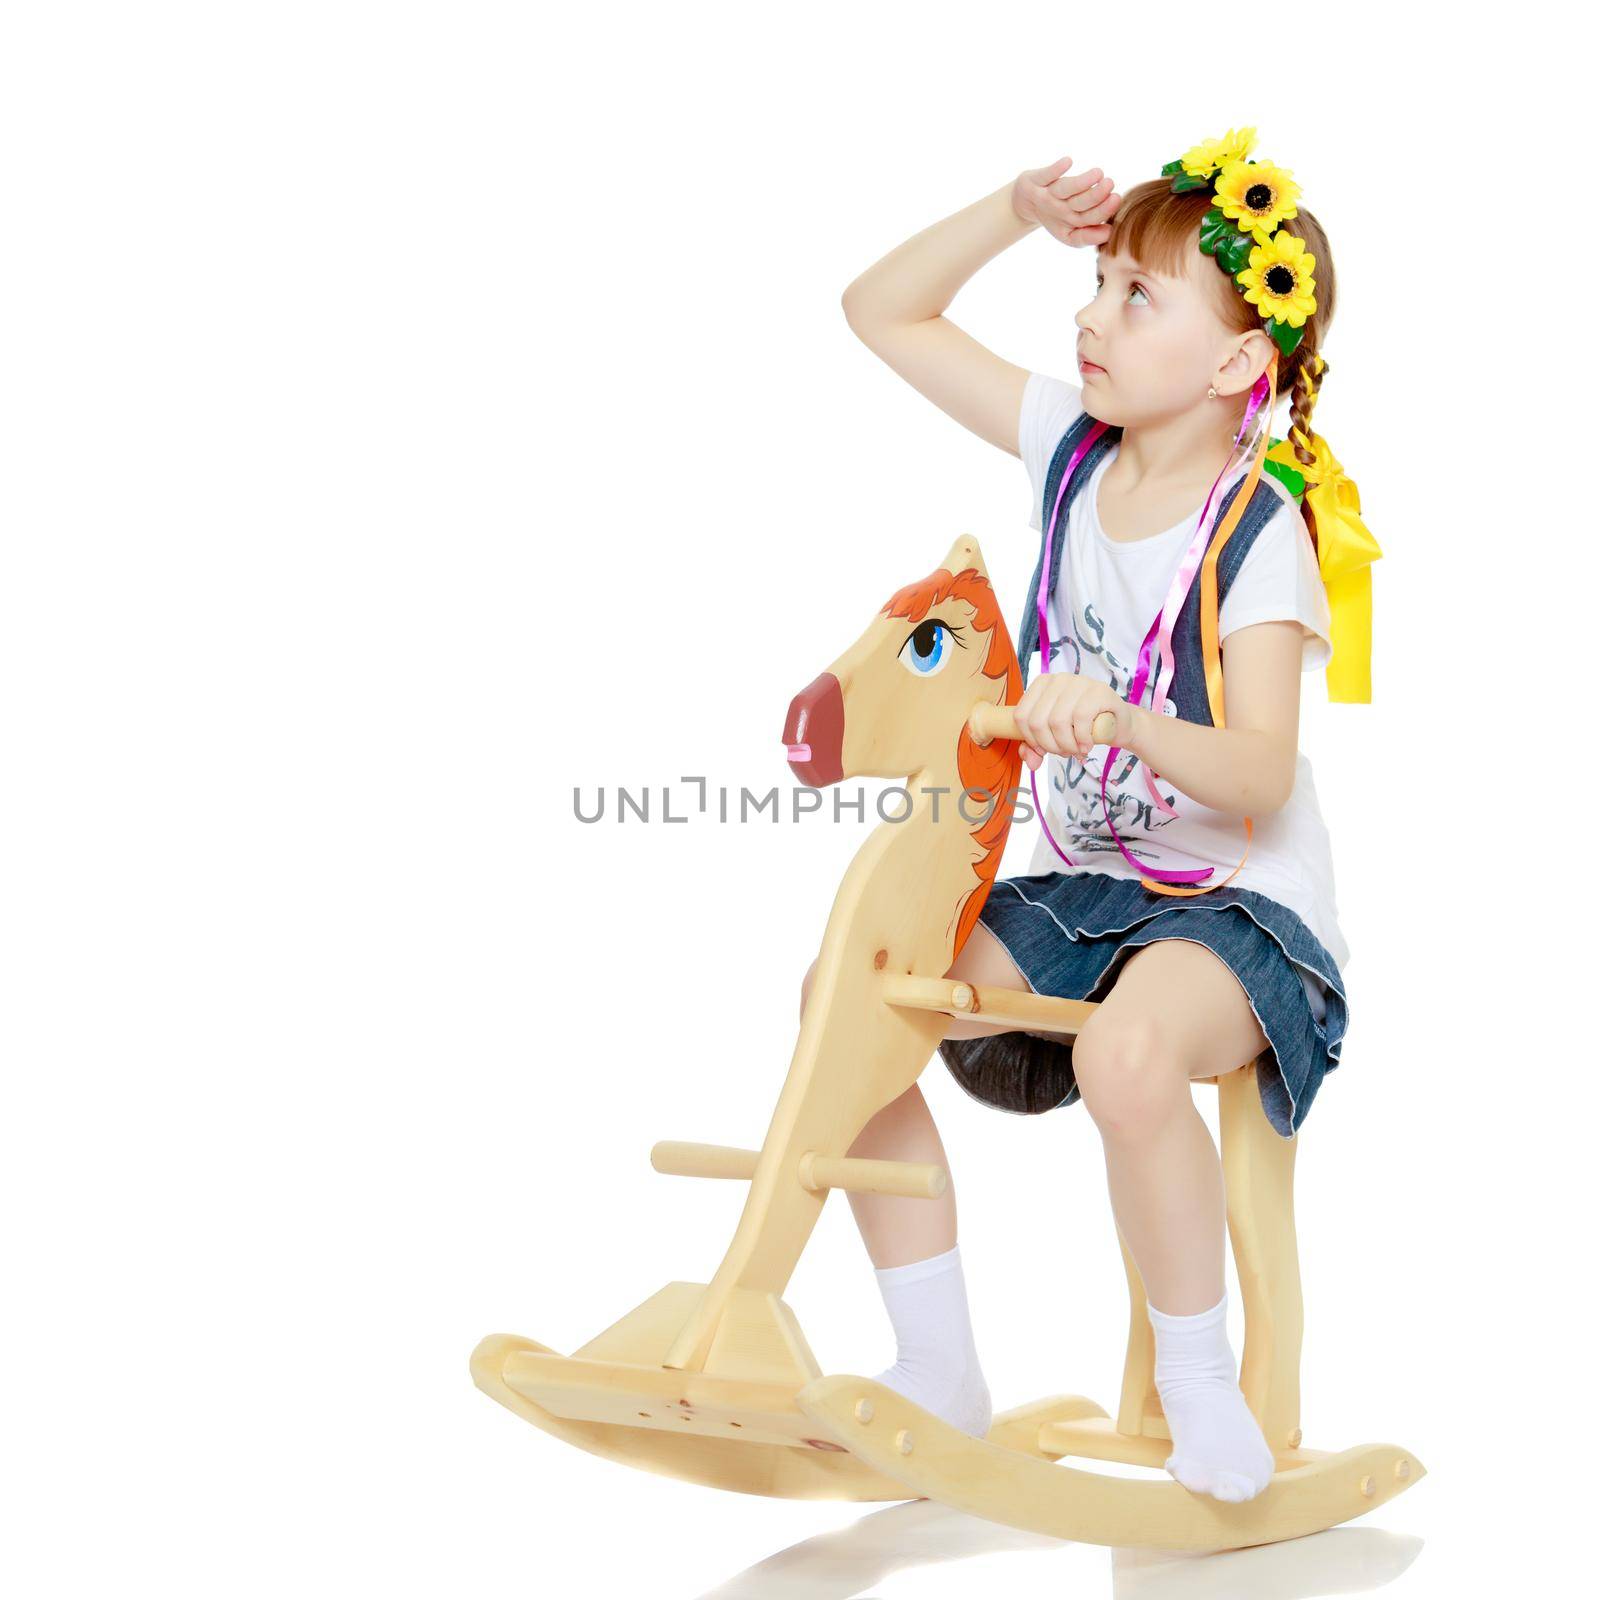 A beautiful little blonde girl in a summer short dress, and a wreath of yellow flowers on her head.The girl is rocking on a wooden horse.